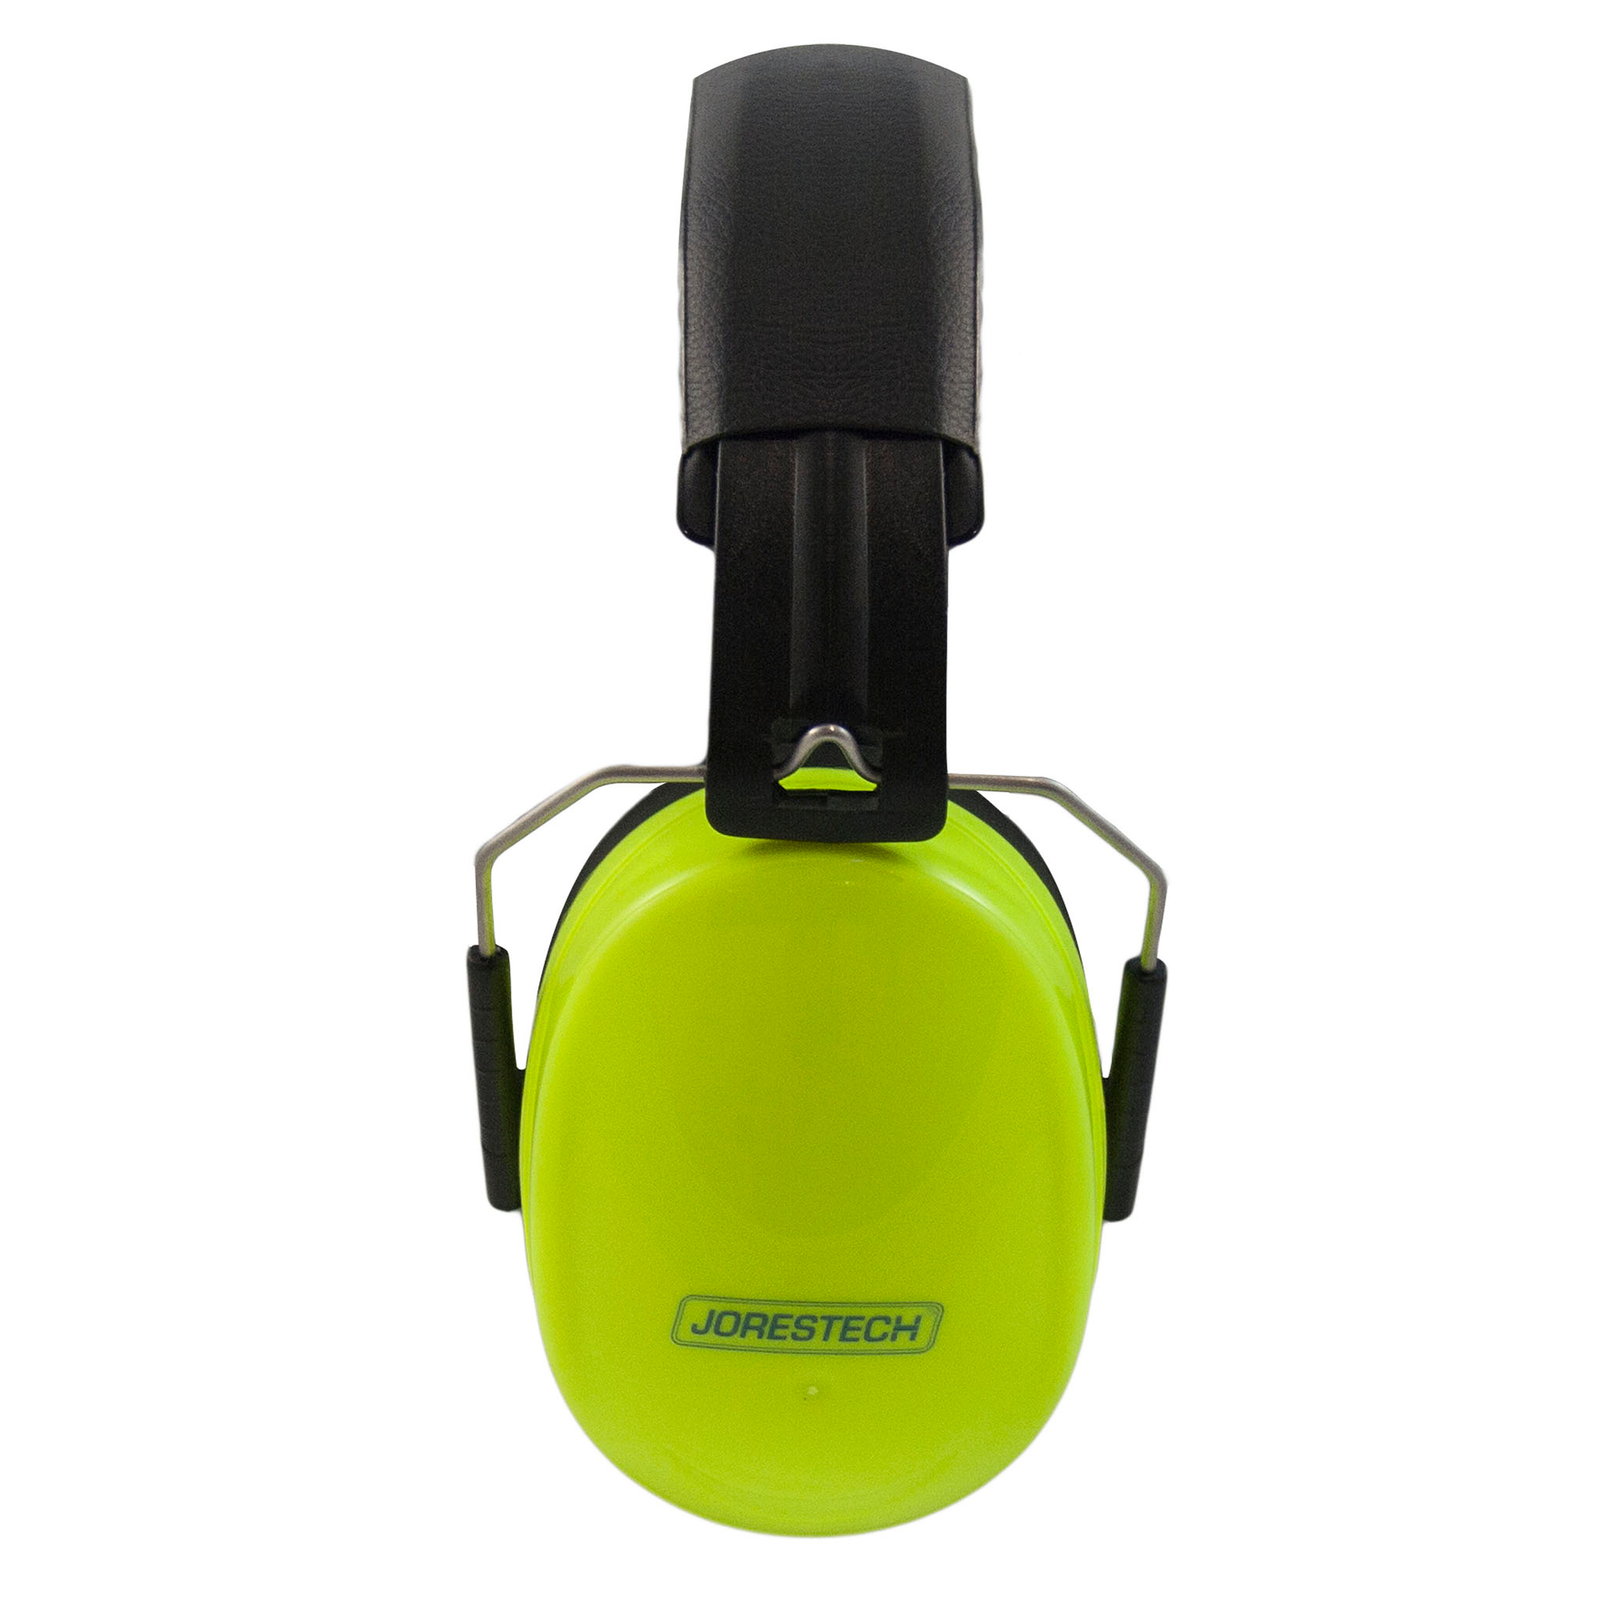 Side view of the JORESTECH Lime ear muff with the head band in an extended position